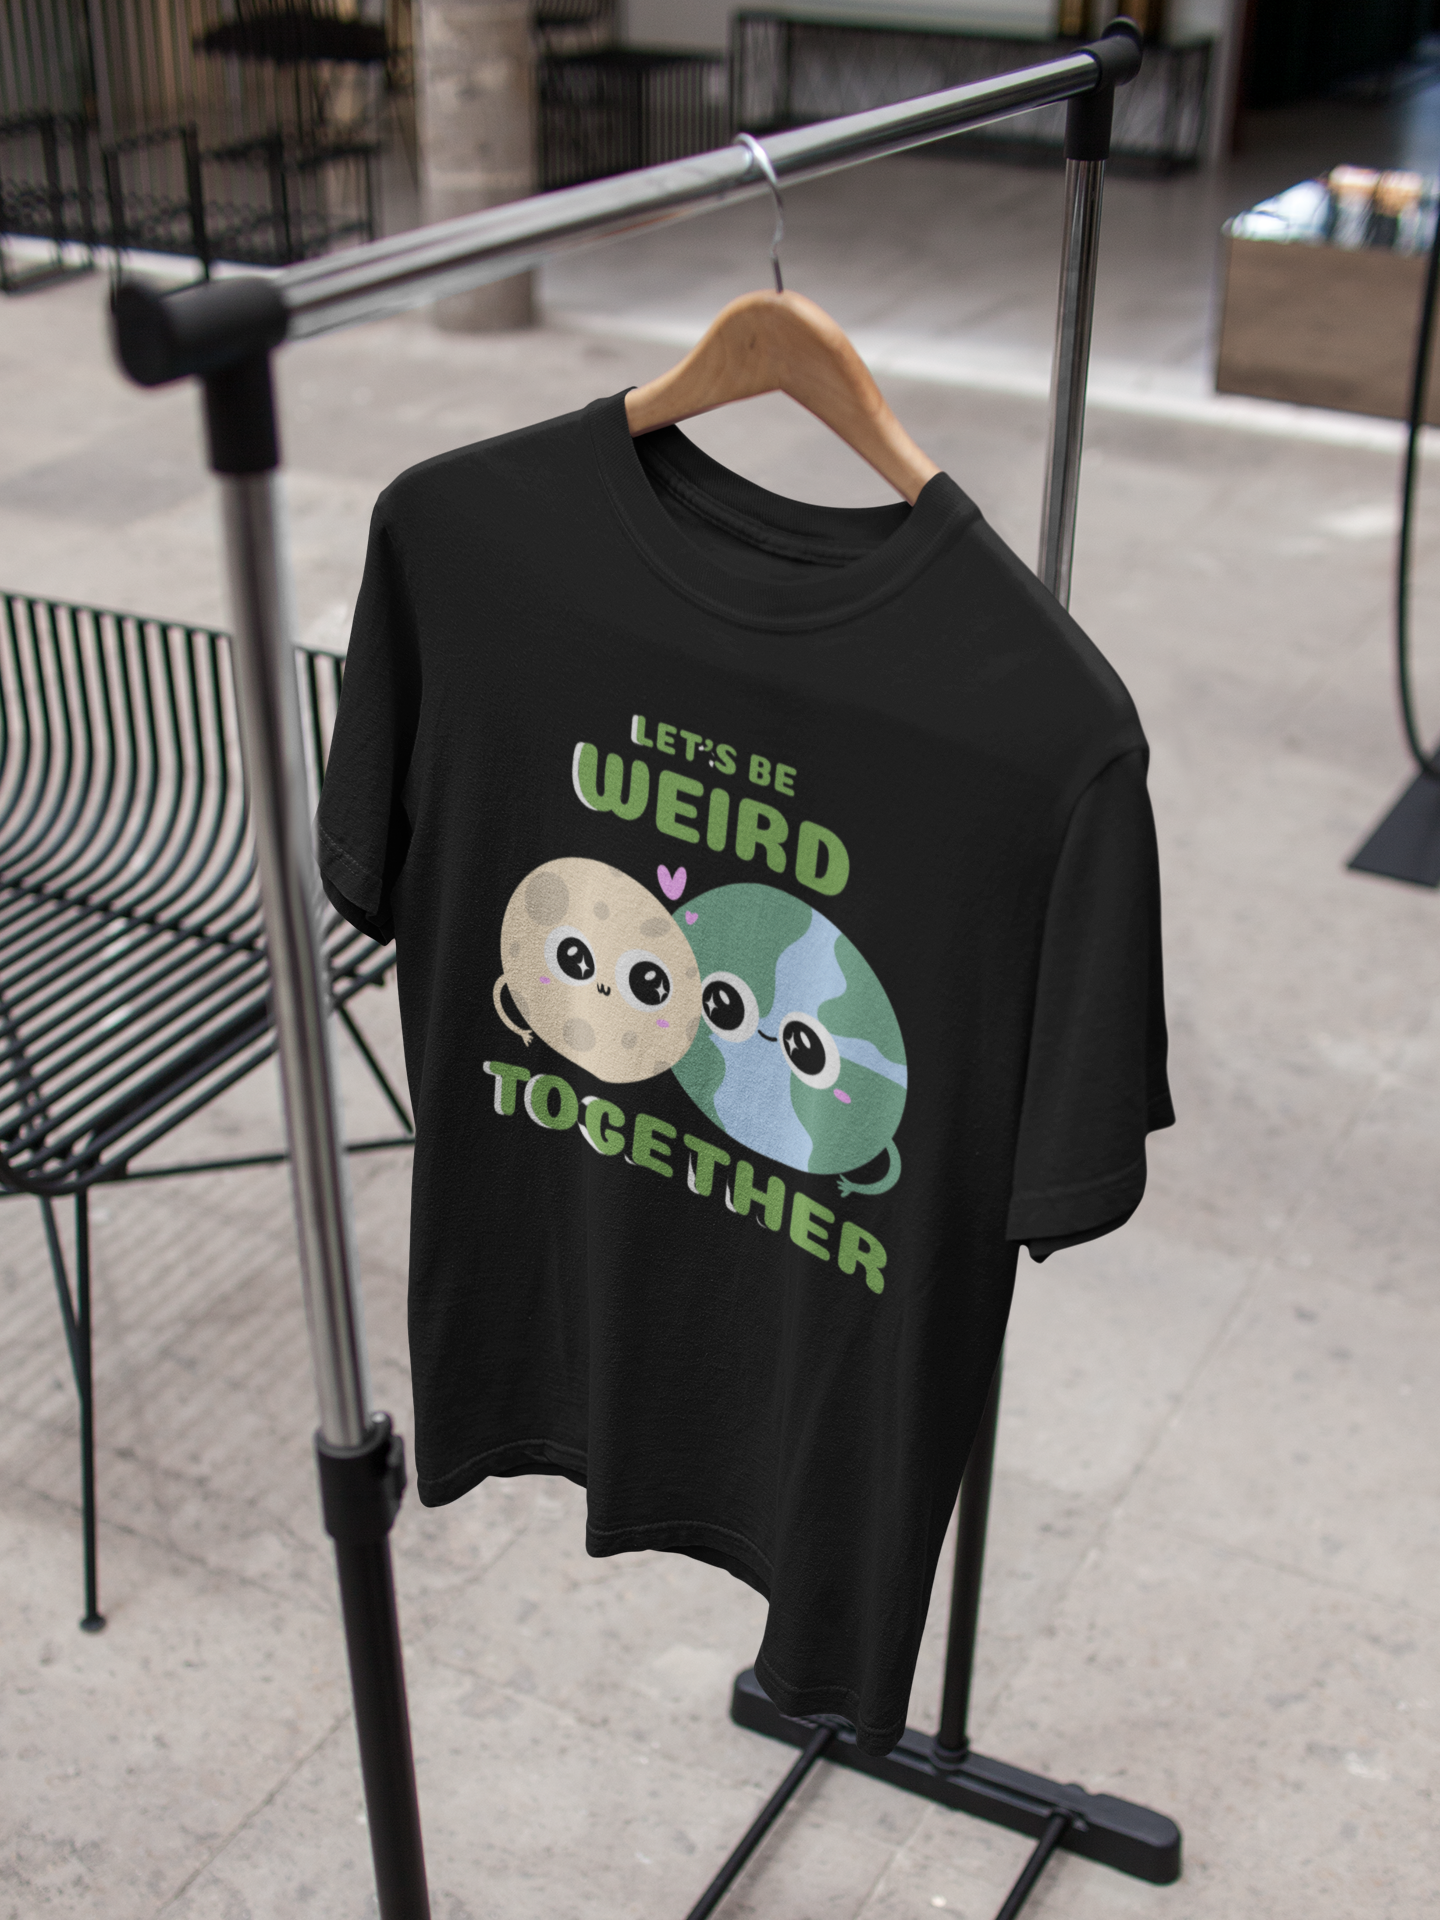 Let's Be Weird Together Unisex Ultra Cotton T-Shirt